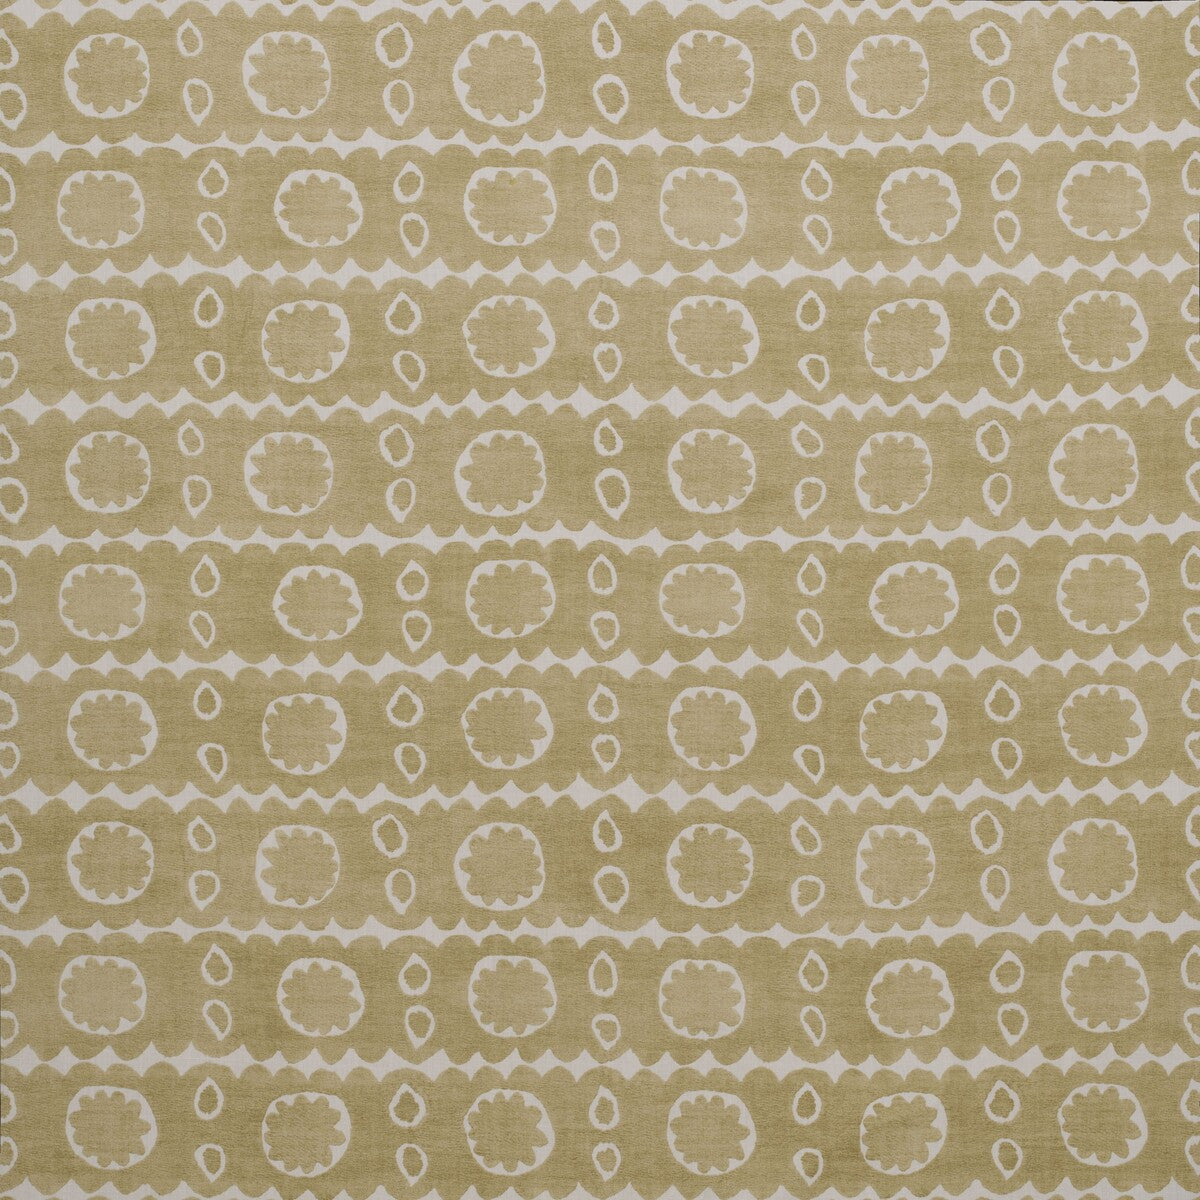 Osborne fabric in gold color - pattern BFC-3653.4.0 - by Lee Jofa in the Blithfield collection